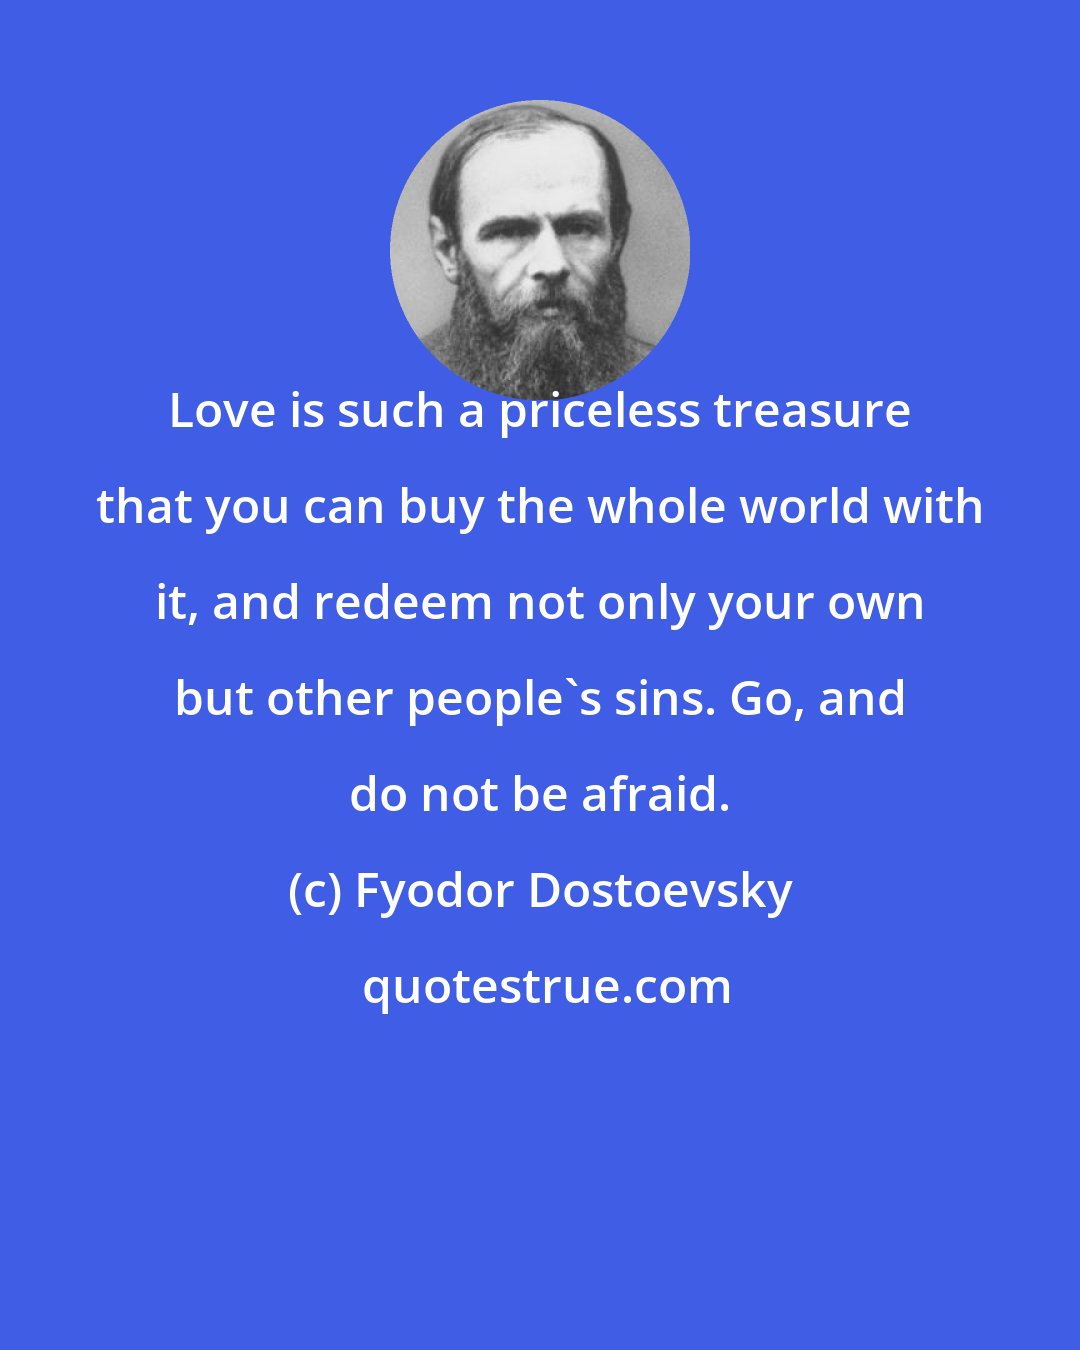 Fyodor Dostoevsky: Love is such a priceless treasure that you can buy the whole world with it, and redeem not only your own but other people's sins. Go, and do not be afraid.